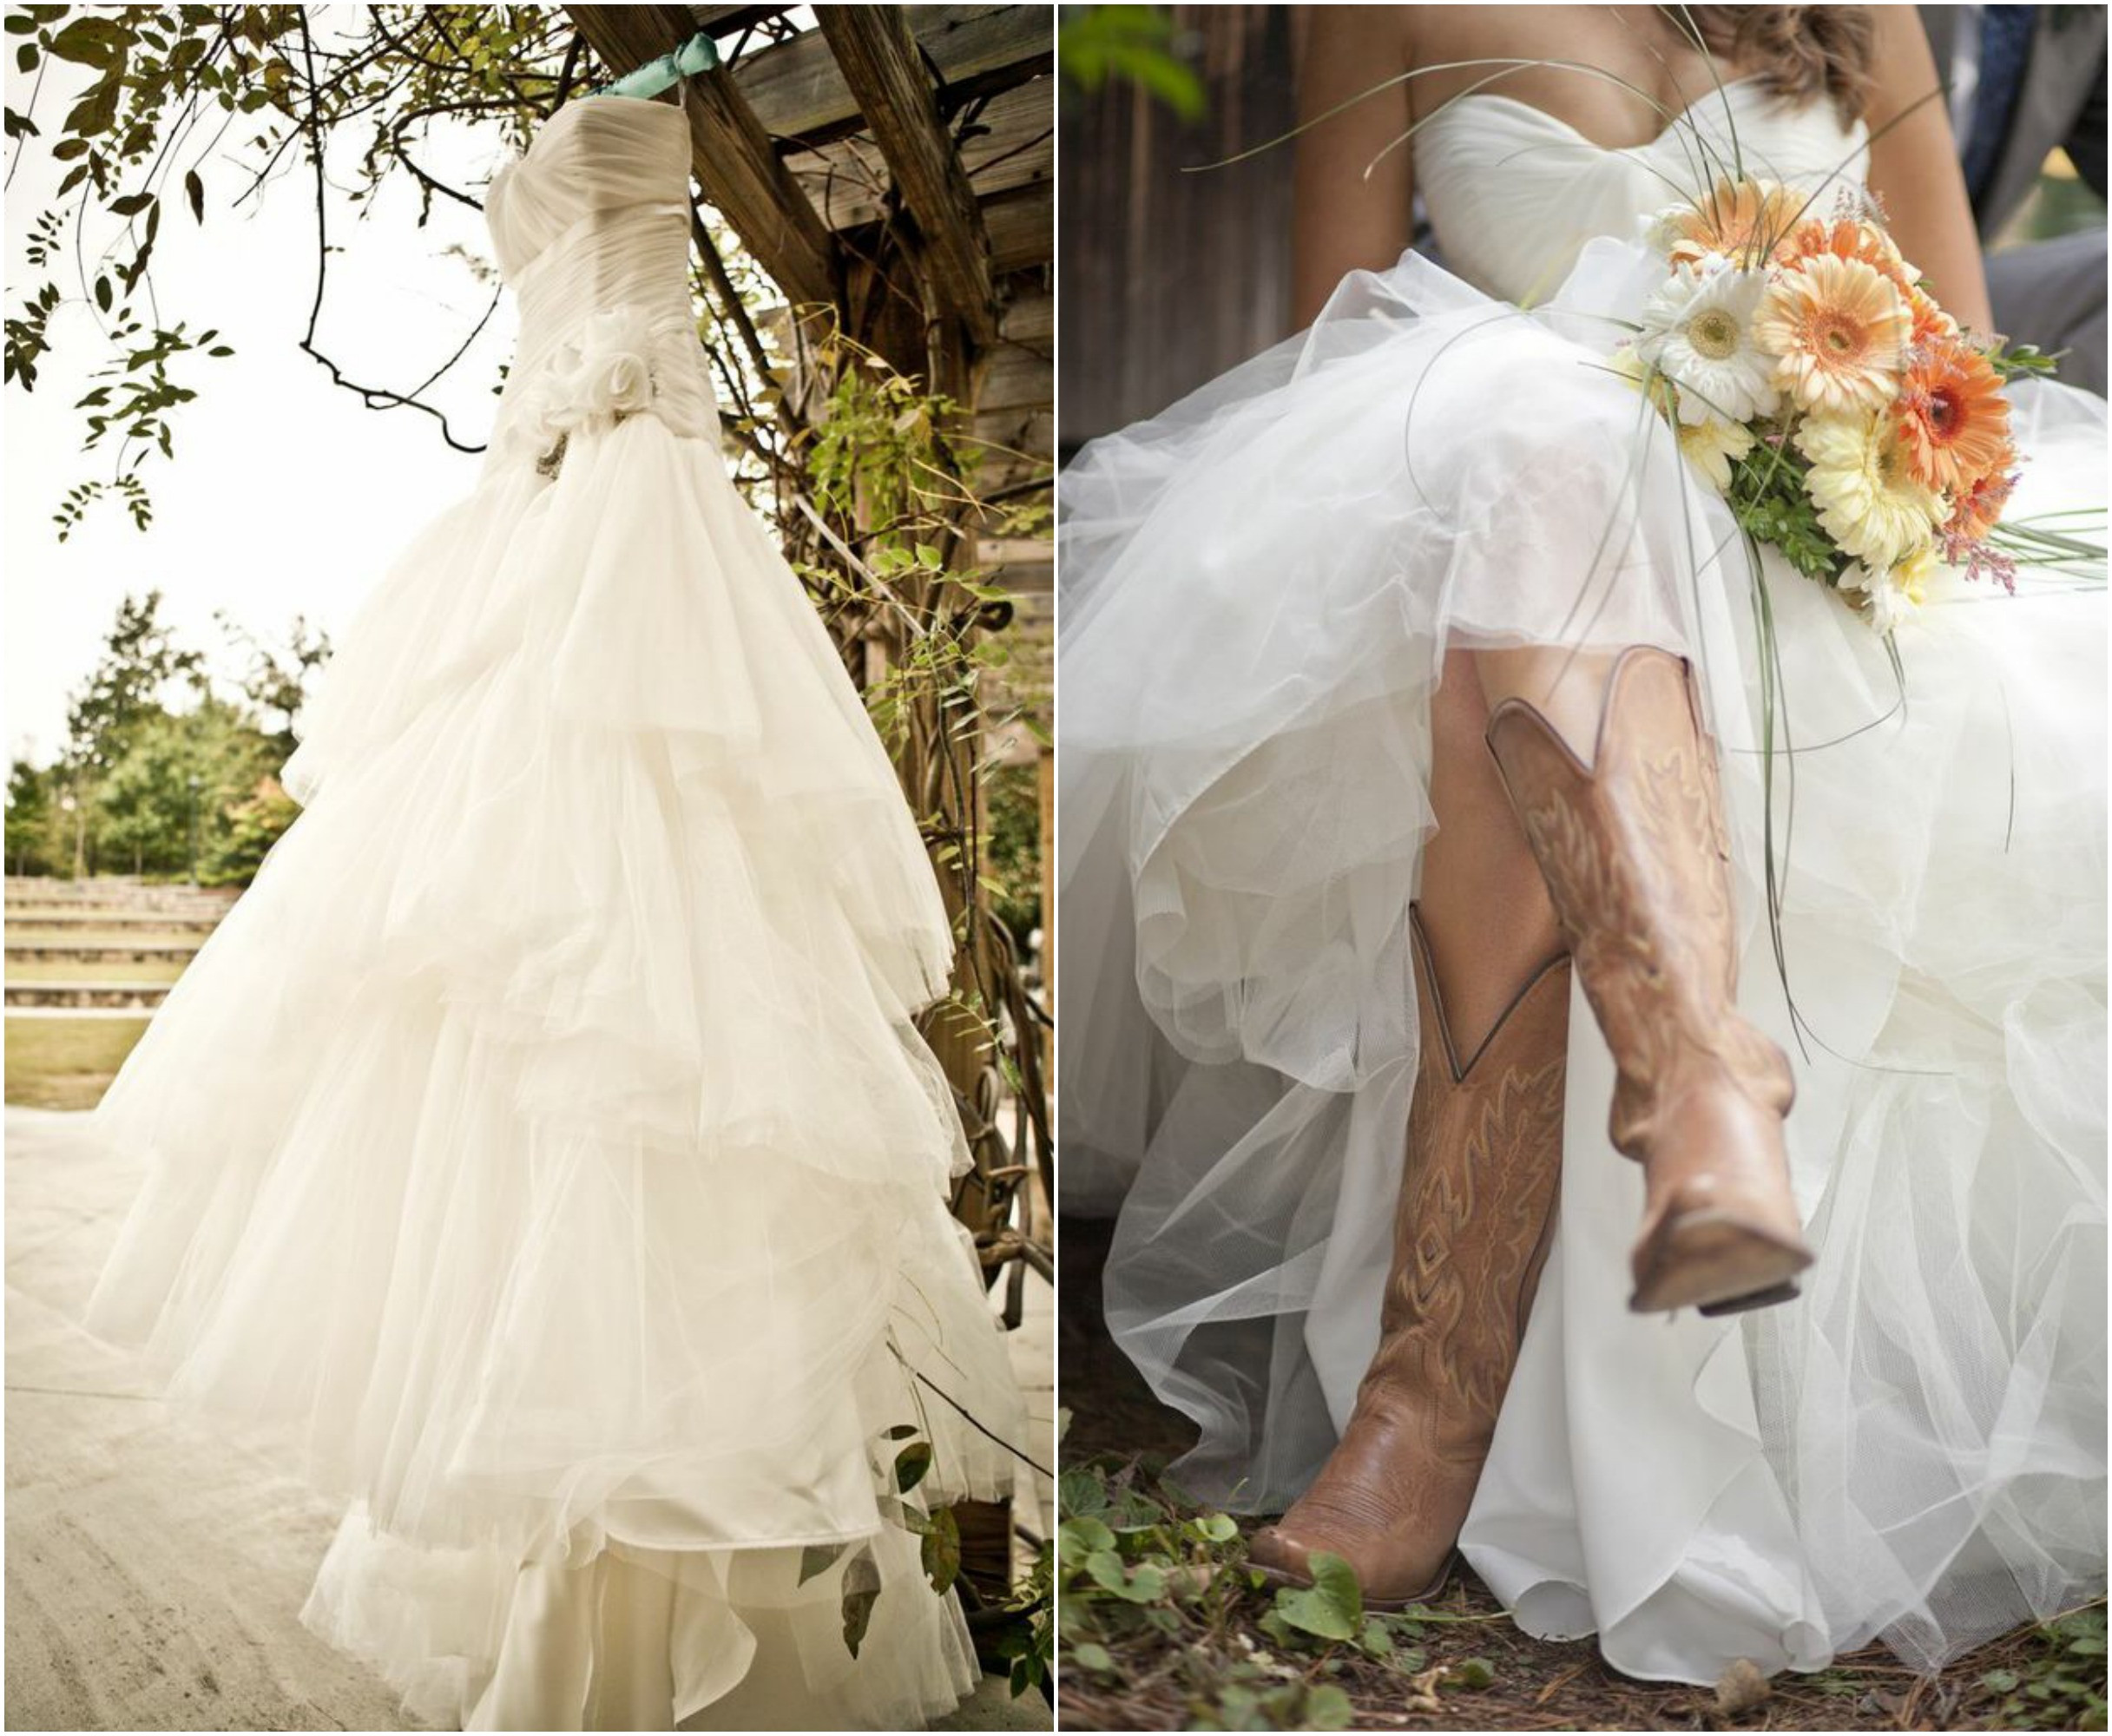 Wedding Dresses With Cowboy Boots
 Rustic Wedding With Bridesmaids In Cowboy Boots Rustic